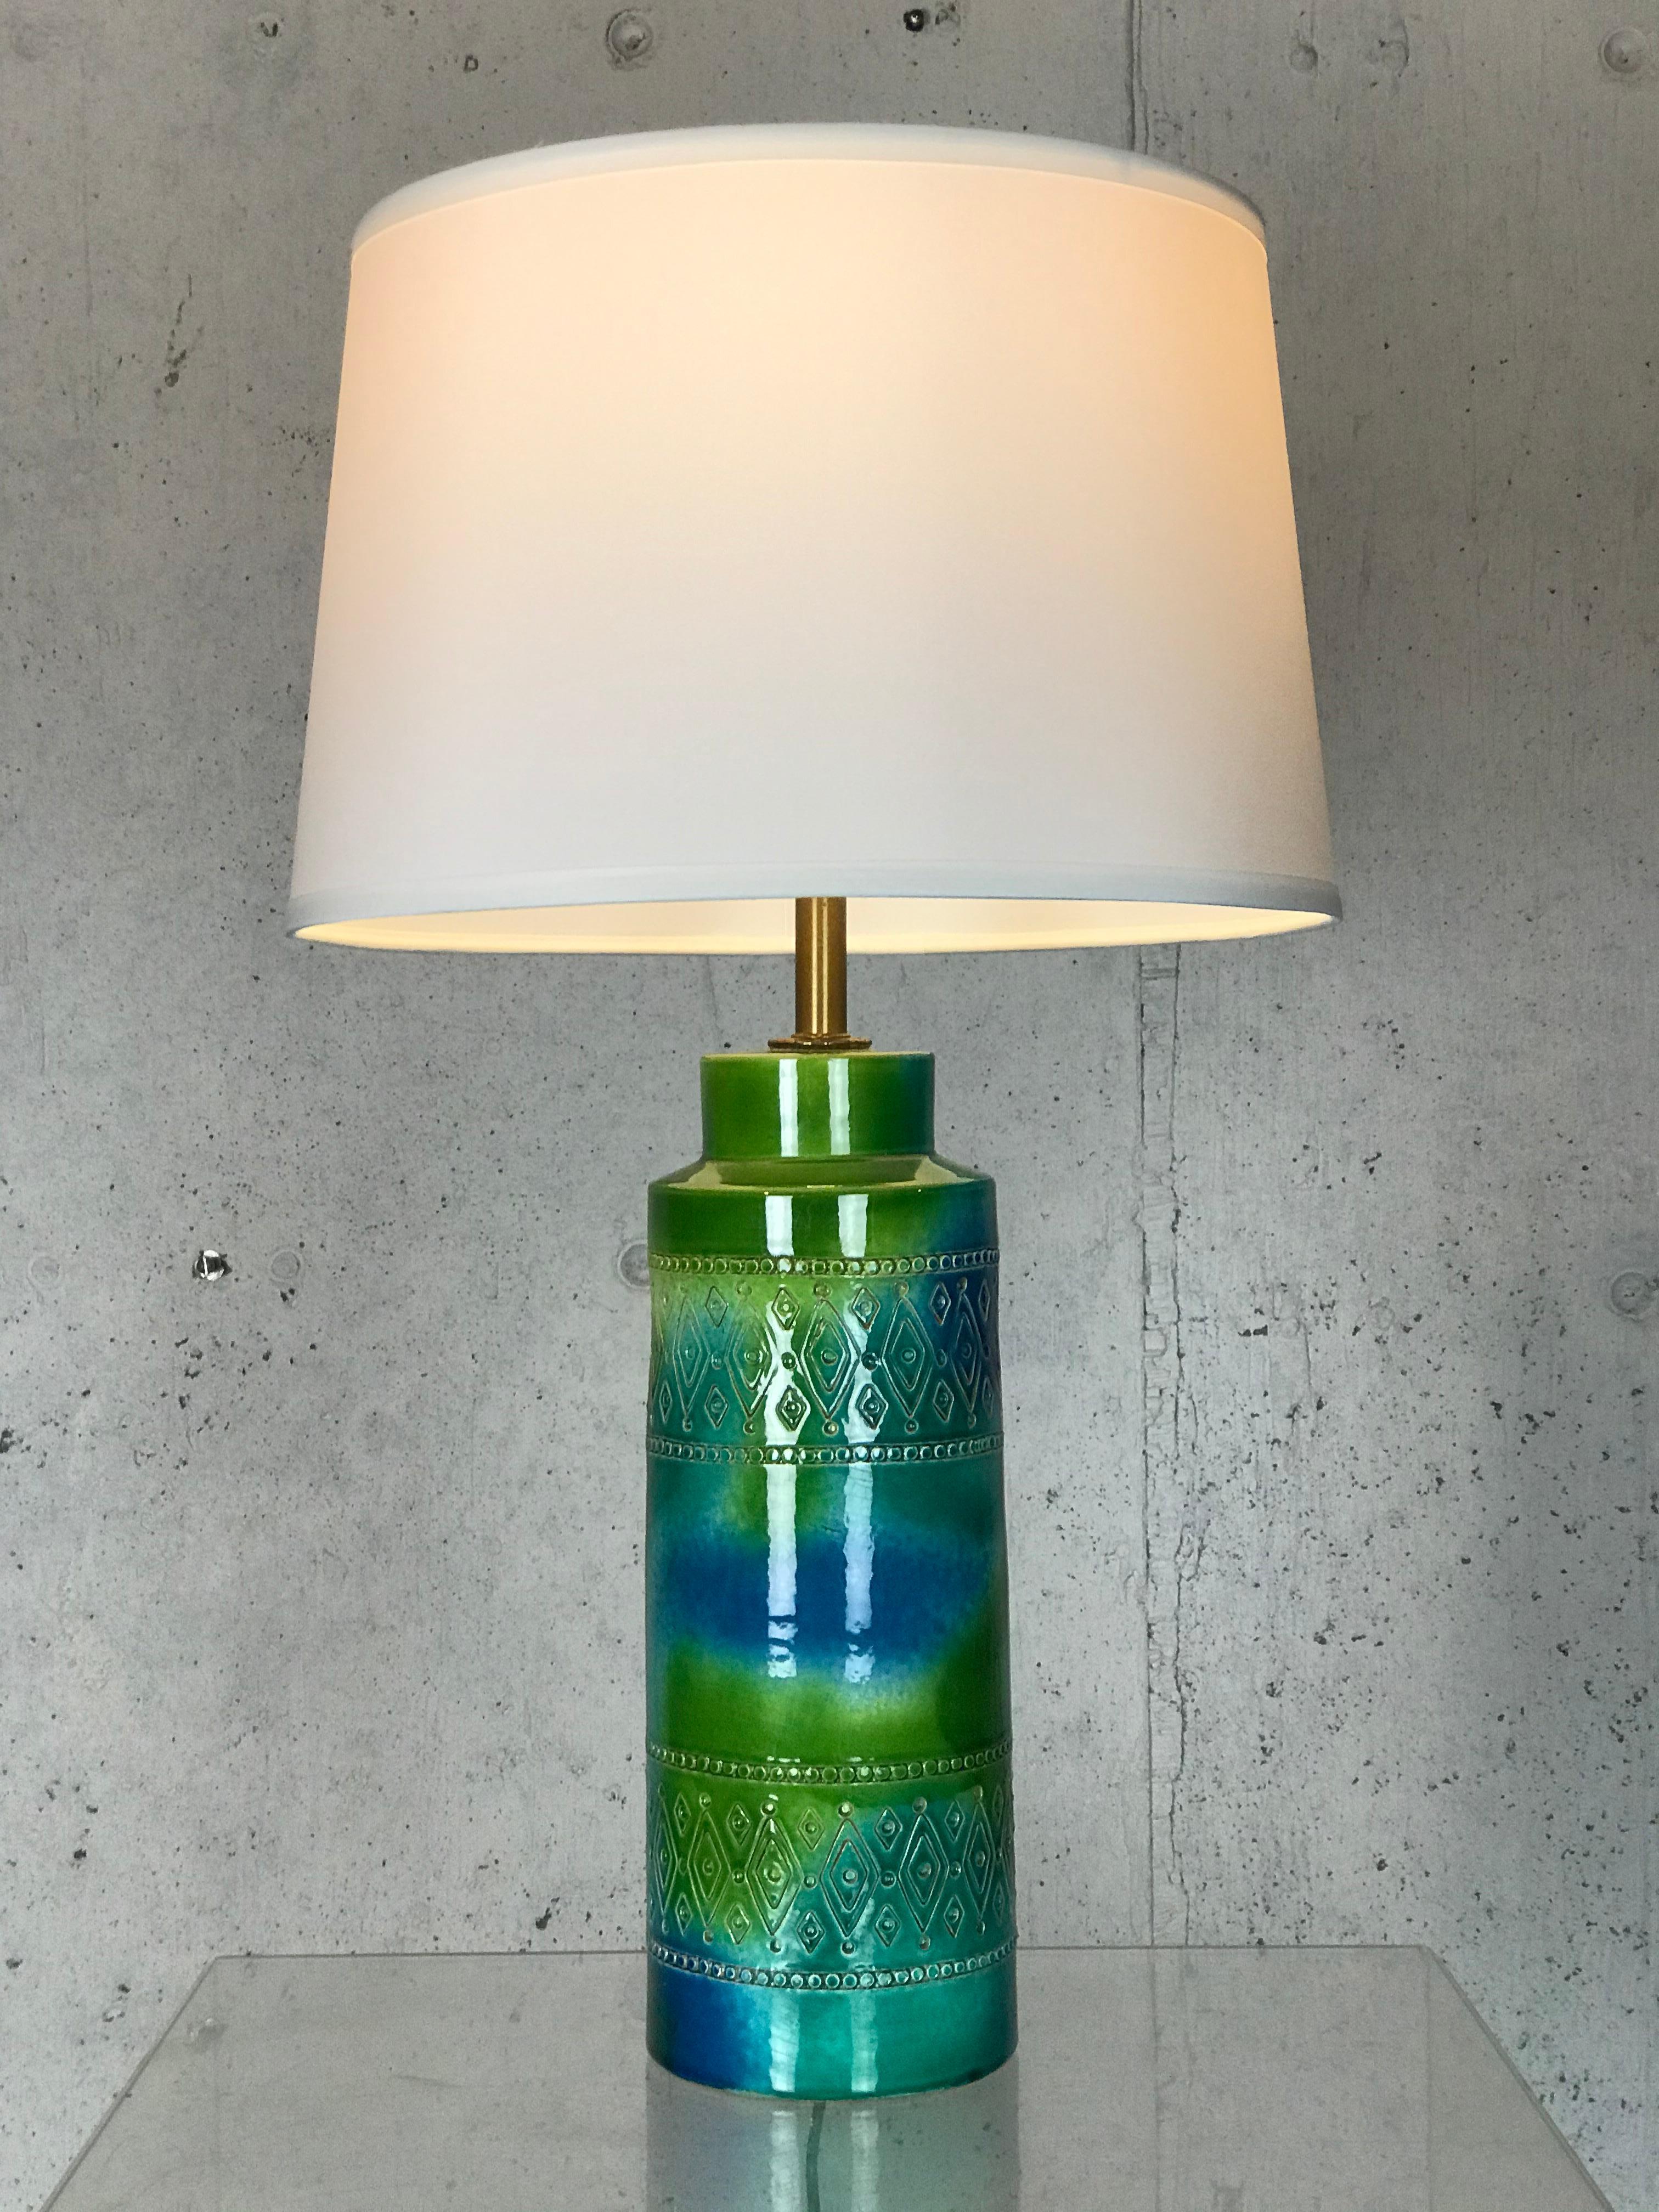 Mid Century Modern Table Lamp with Blue and Green Glaze by Bitossi for Raymor  1